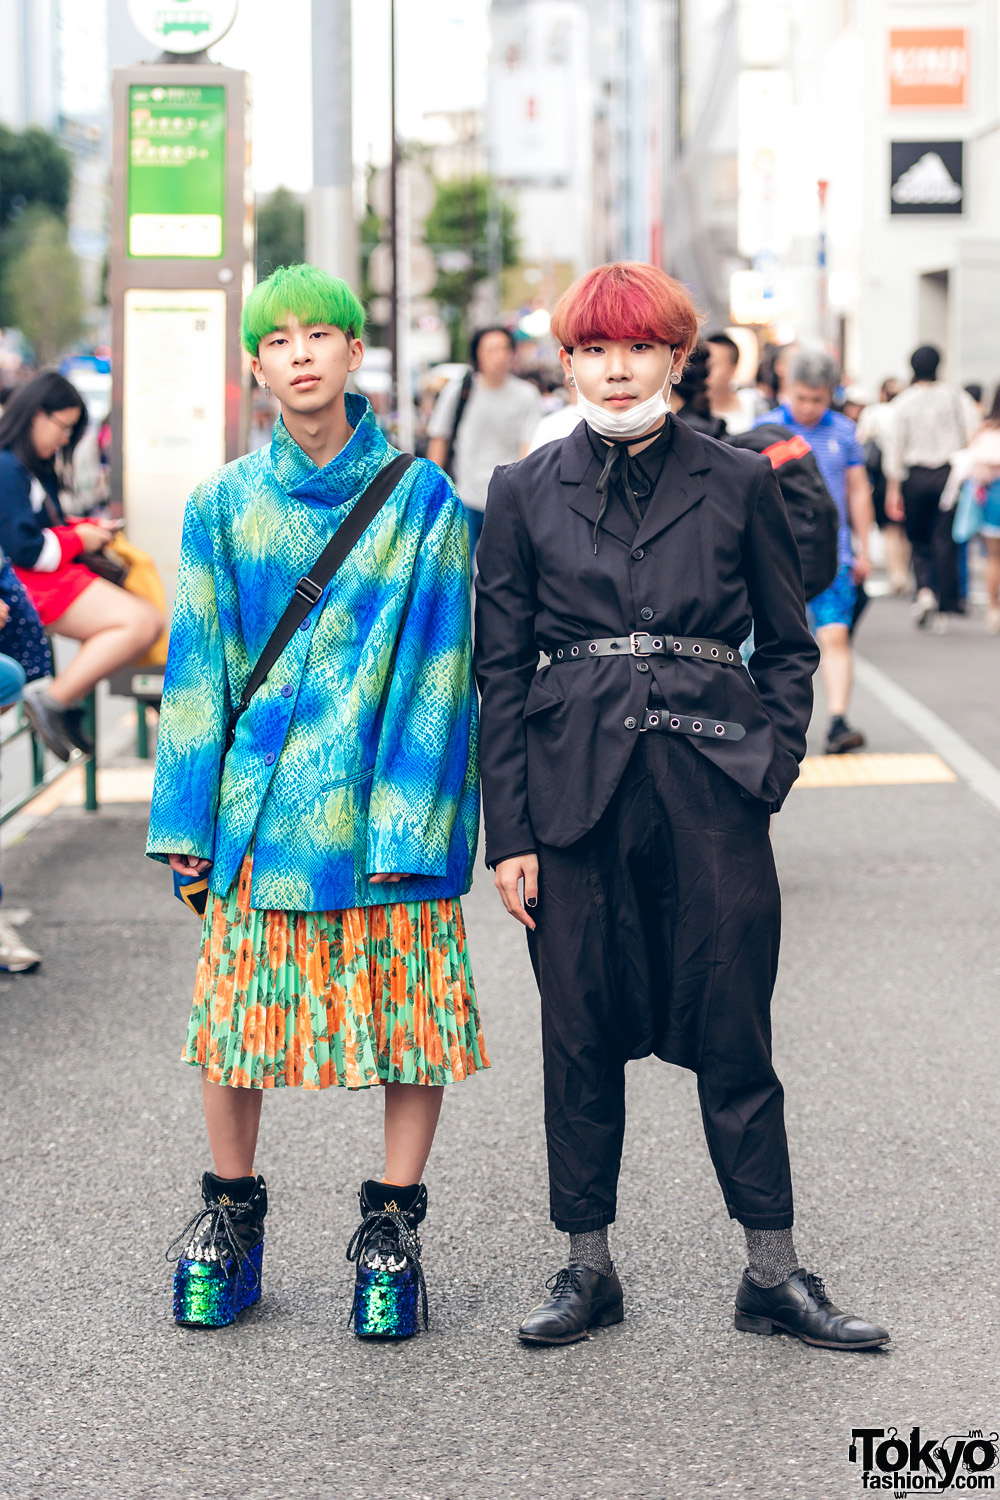 Japanese Eclectic Vintage & All Black Street Styles w/ YRU, Comme des Garcons & 80s Junko Shimada